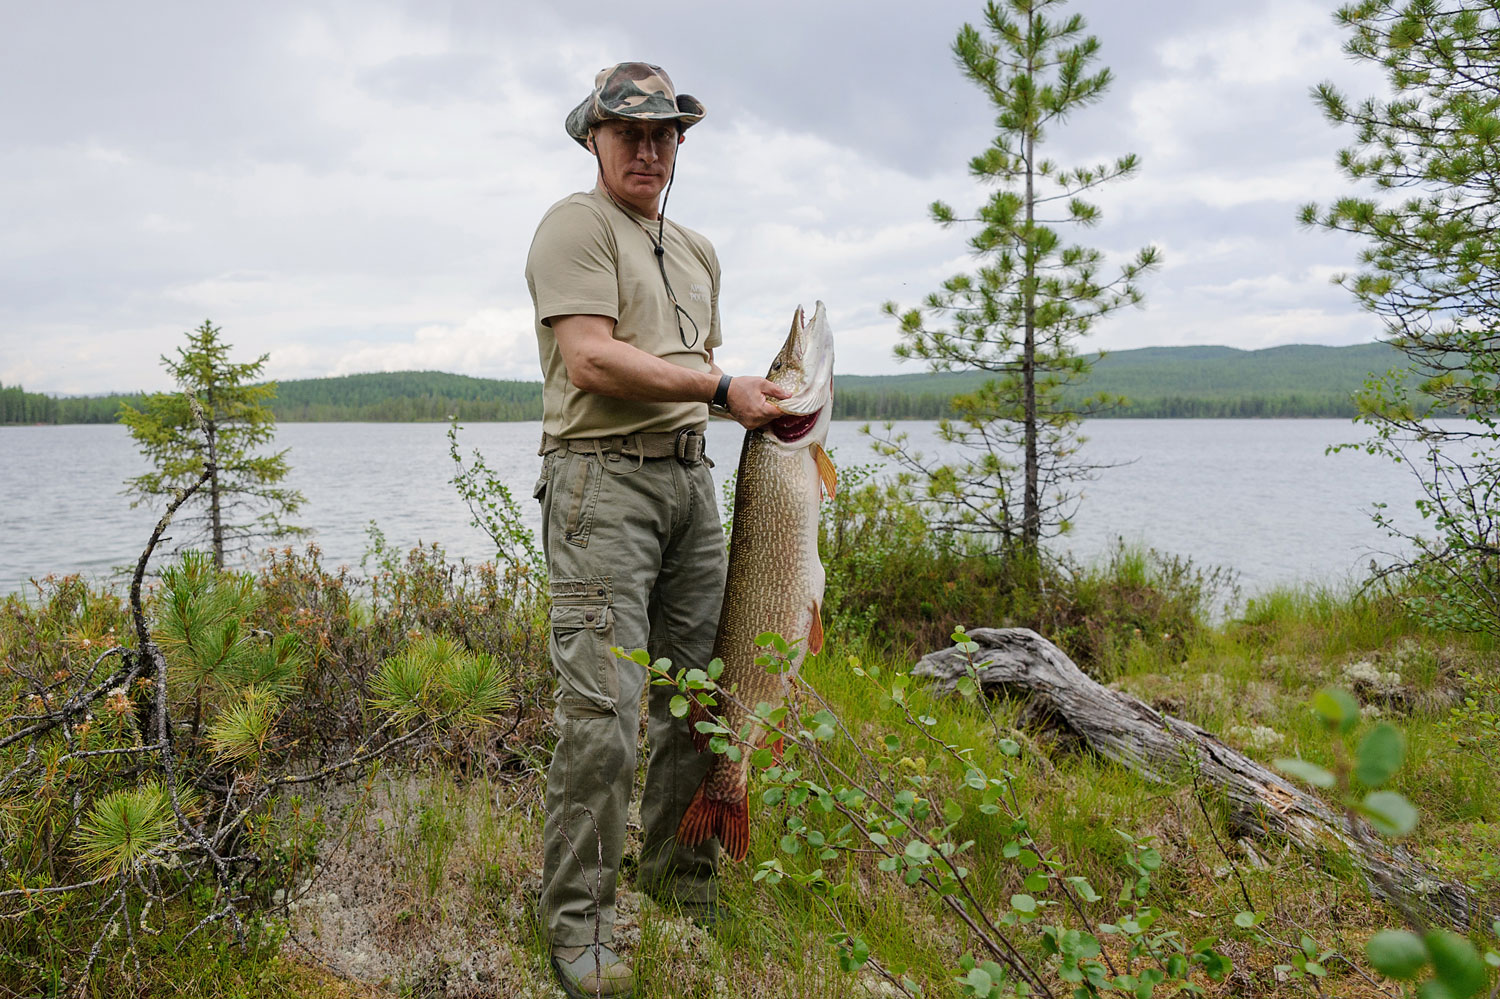 President Vladimir Putin holding a huge pike fish, after he caught it in the Tyva region on July 20, 2013 during his vacation.